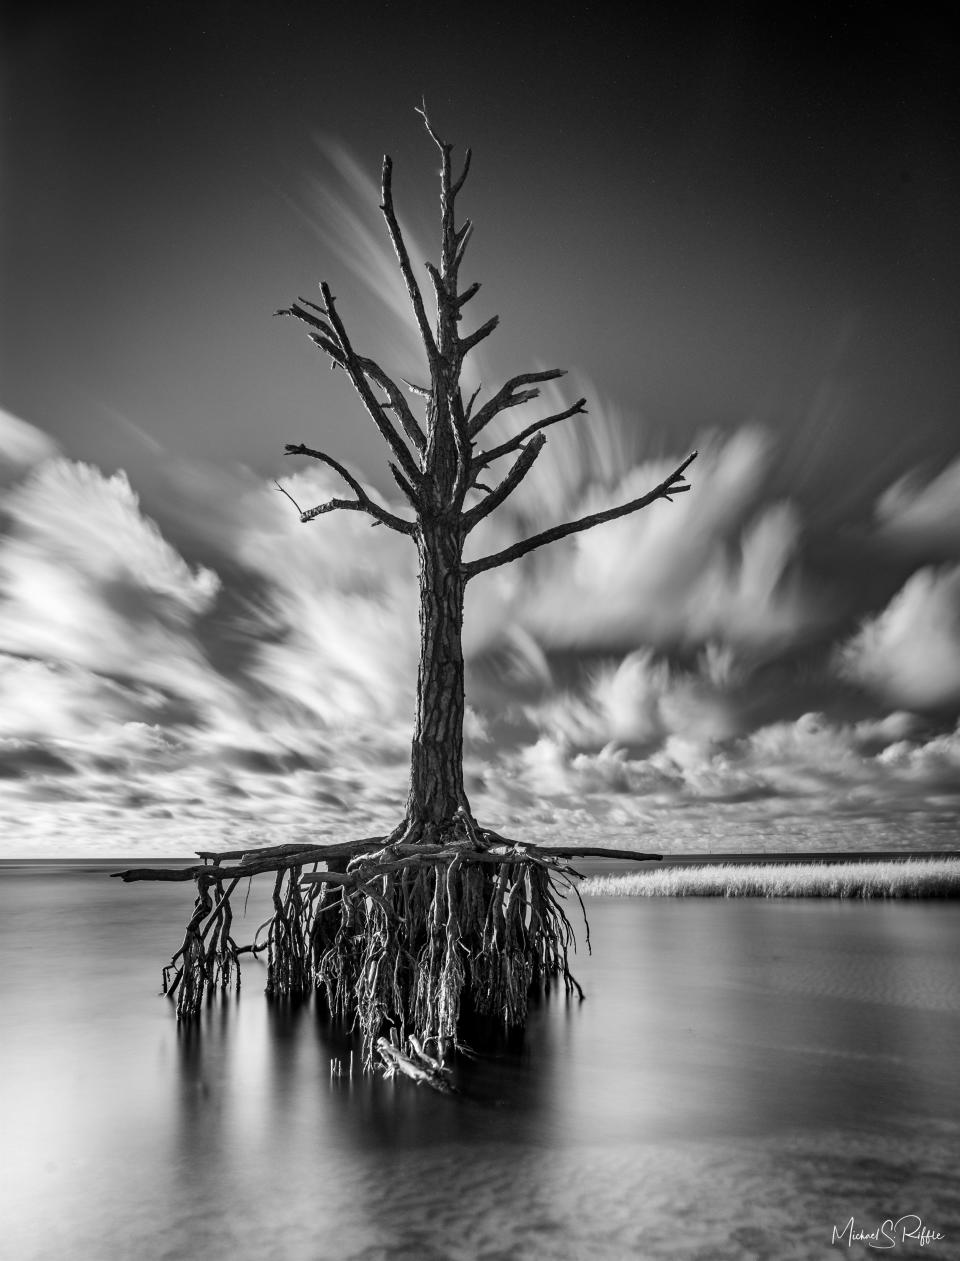 Michael Riffle shows Florida’s wildlife photos at the 2022 Photofest opening at the Artport Gallery in November.